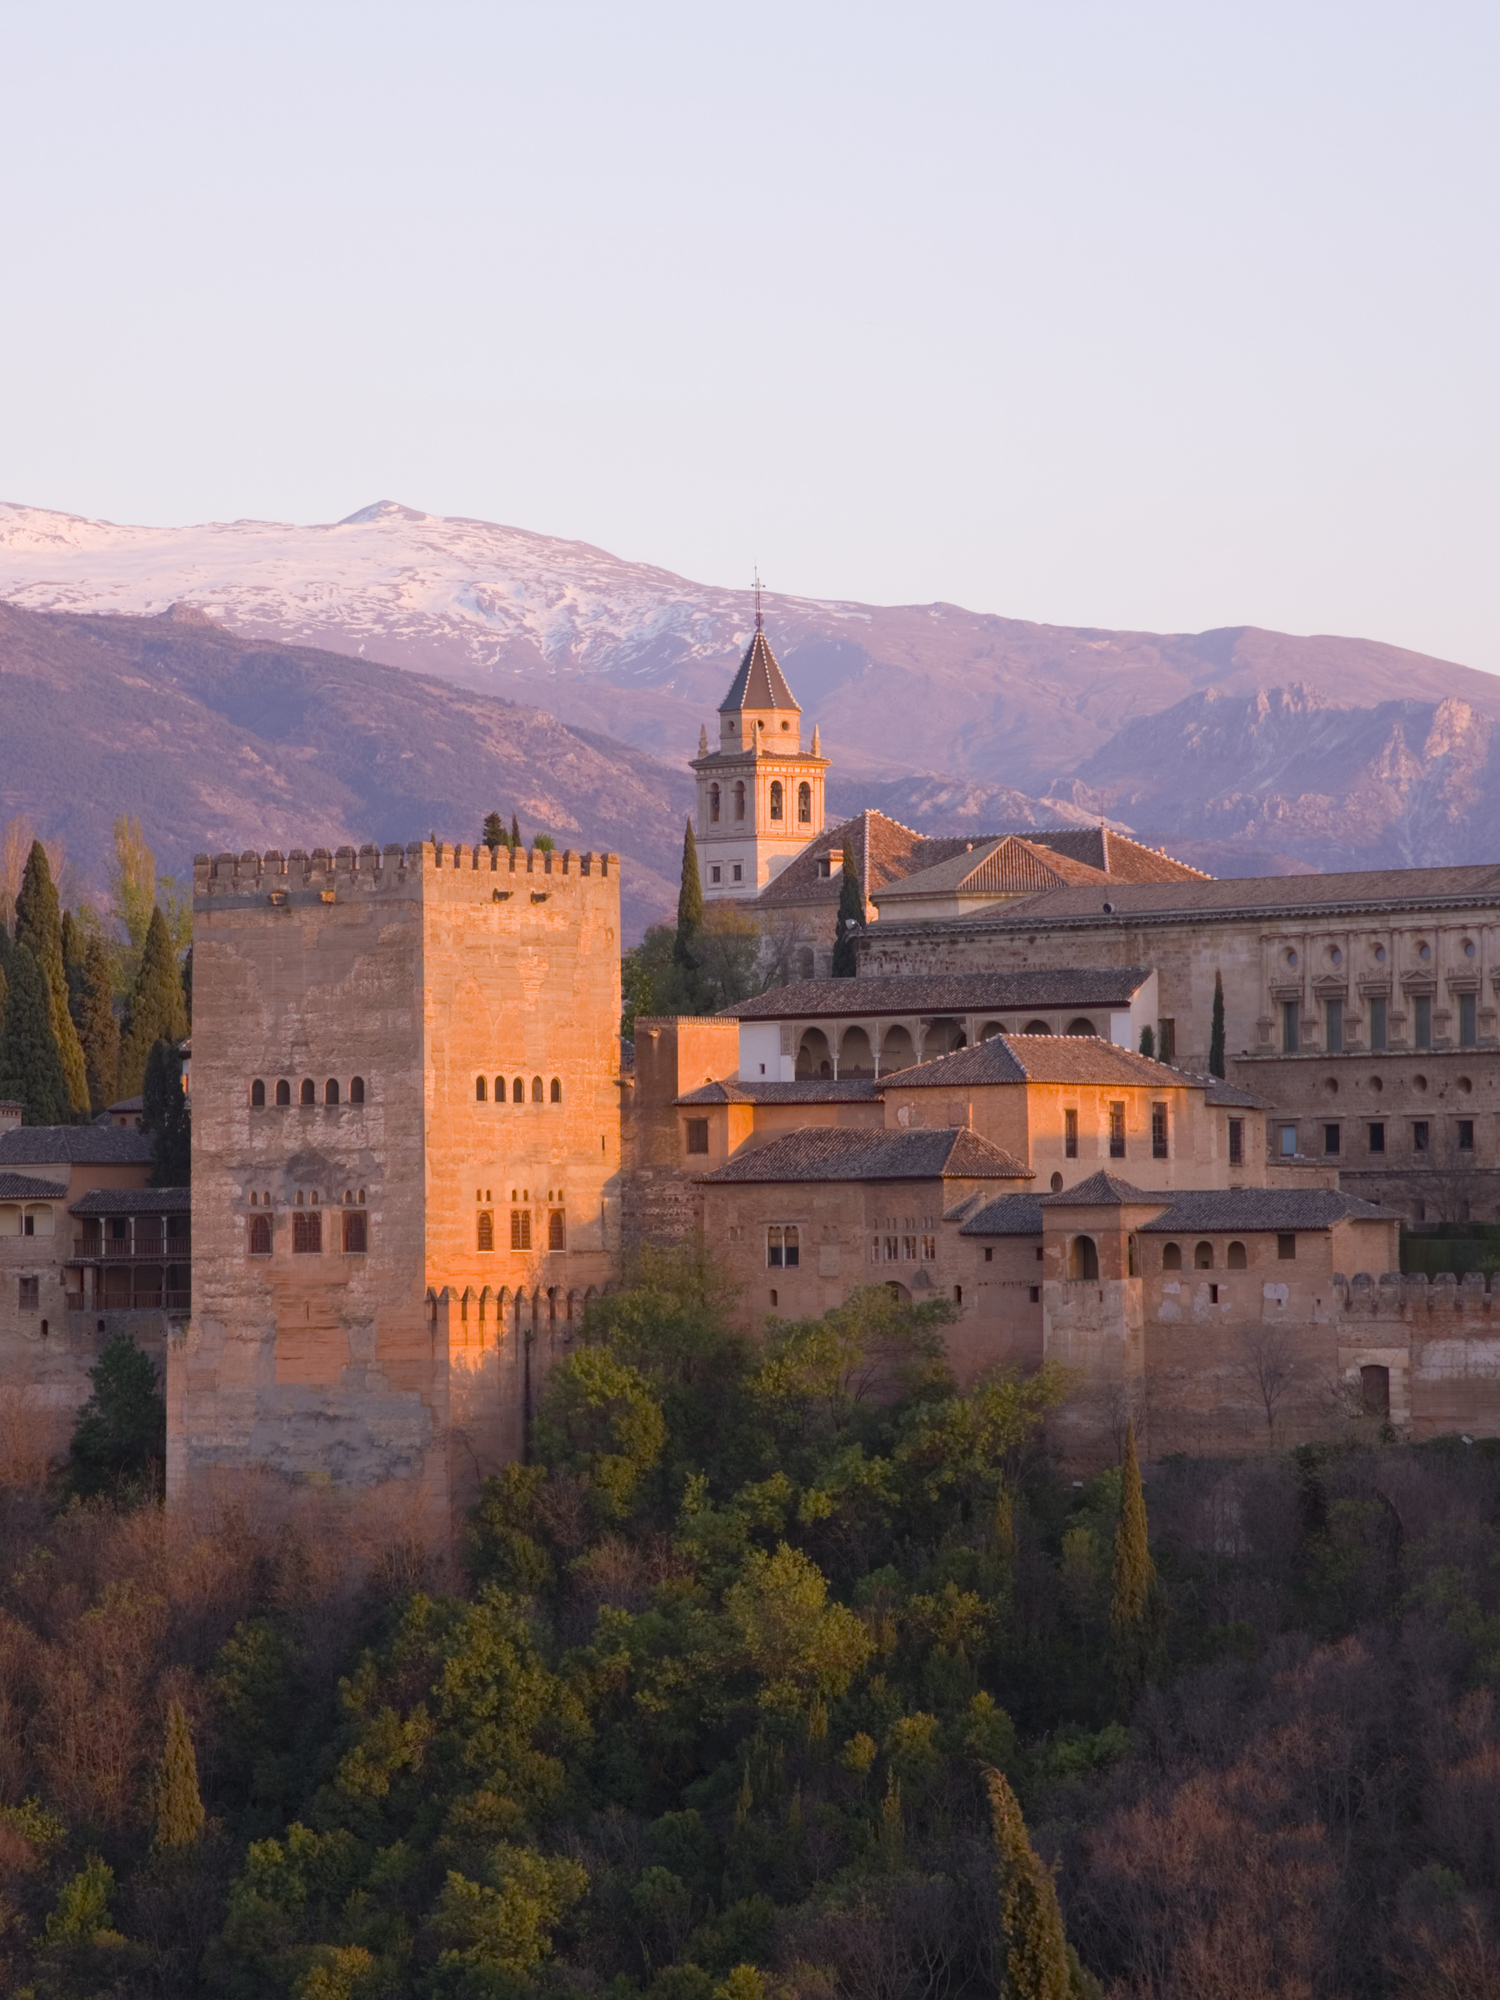 Sunset view of the Alhambra palace complex with the Sierra Nevada in the background